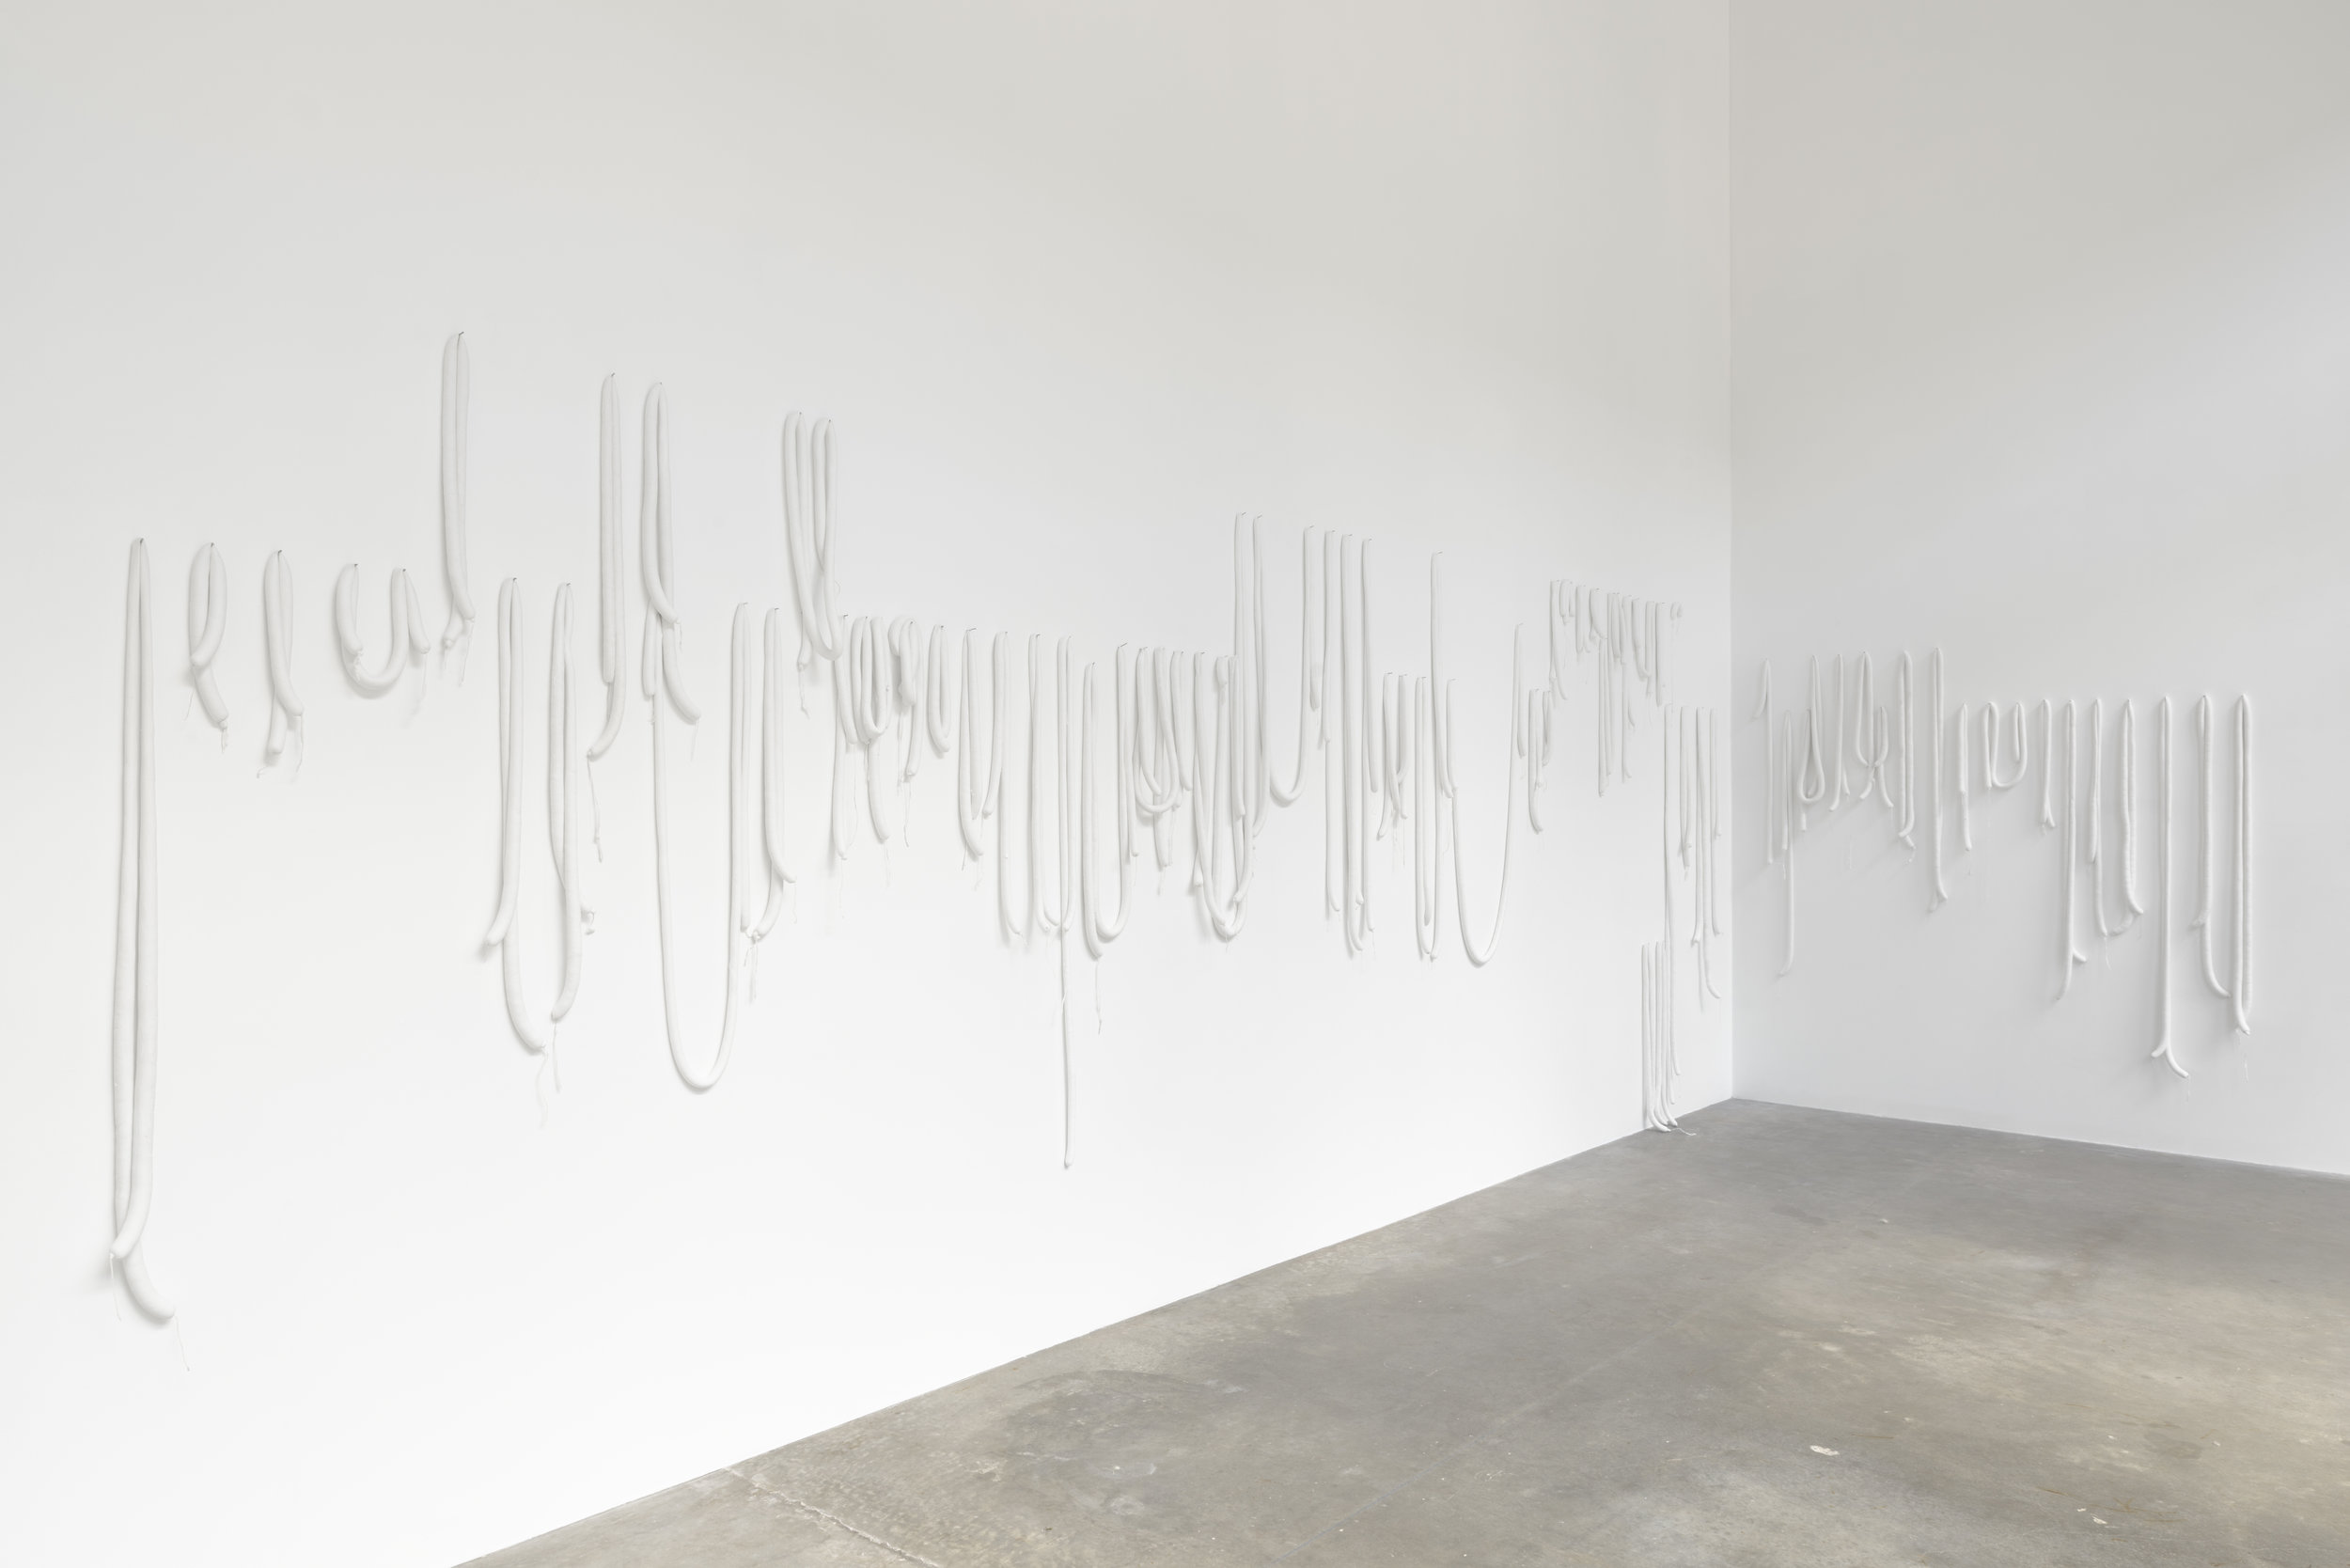  Installation view facing South.  Untitled  Plaster, sausage casings, nails  Dimensions variable 